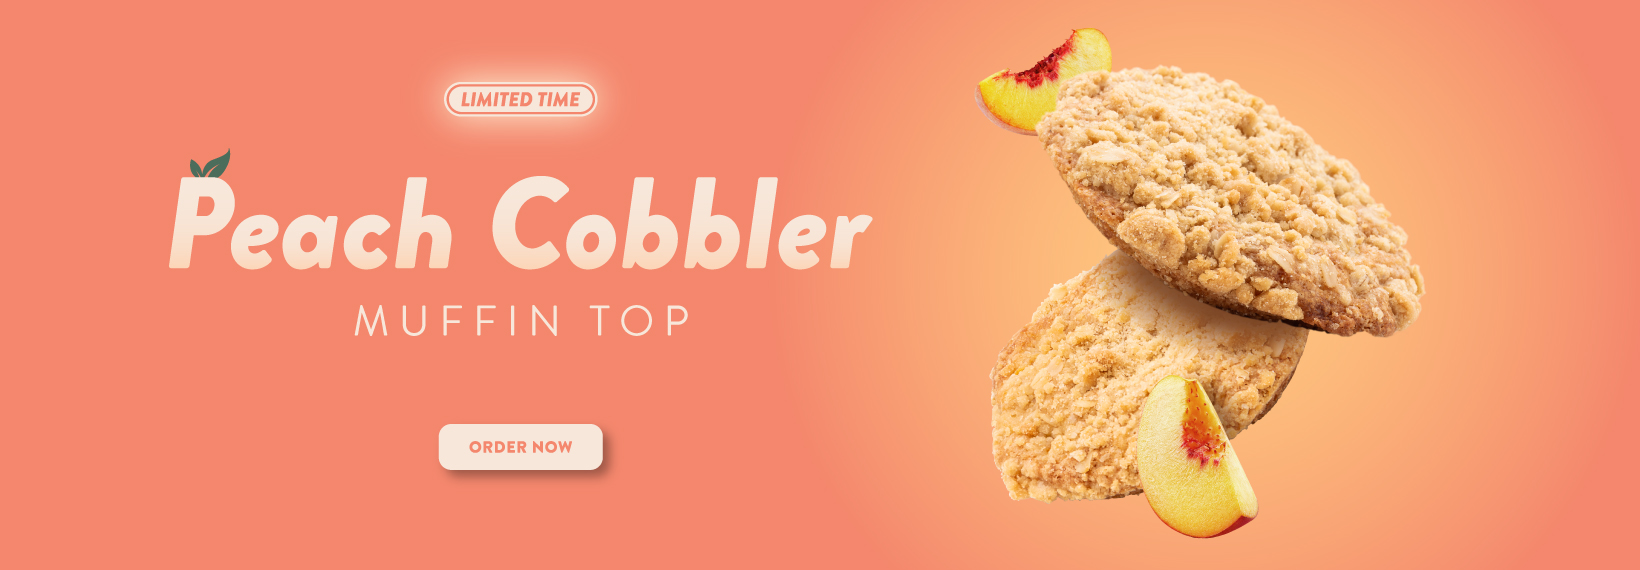 image of the peach cobbler muffin top